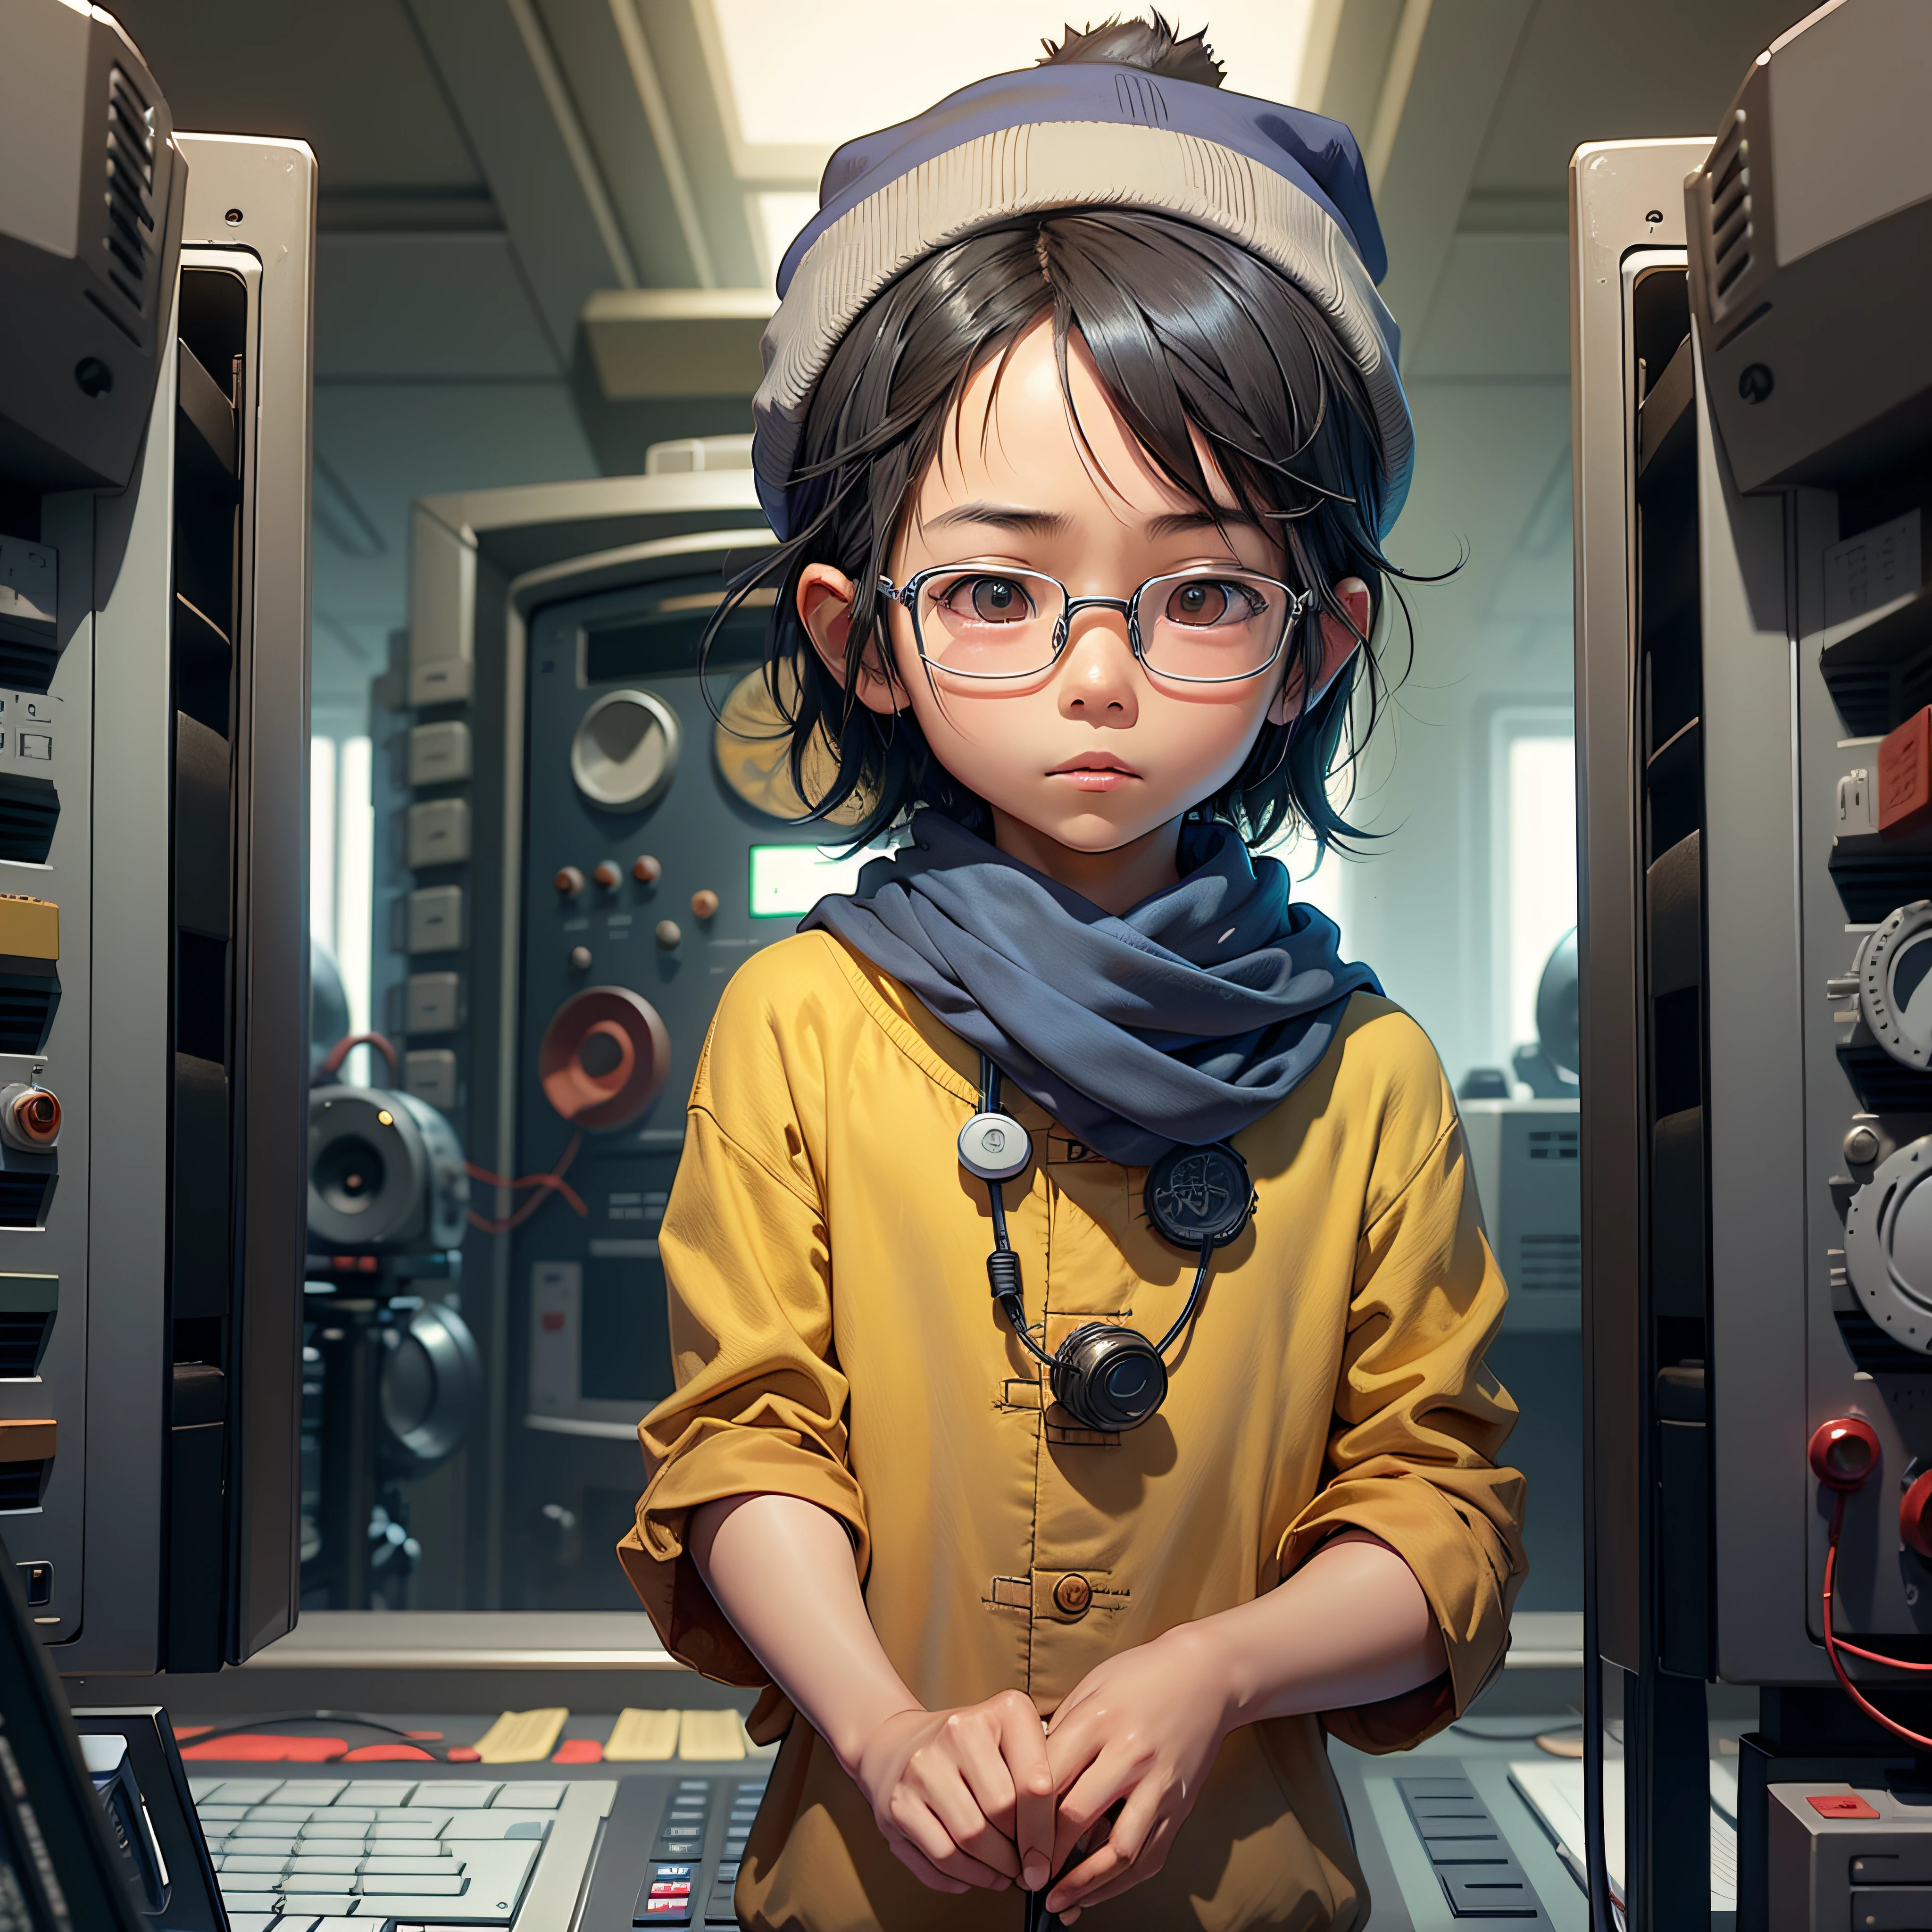 In the style of Ghibli Animation, Nam a Vietnamese young boy with black hair and big brown eyes wearing glasses and scarf and beanie, looks hyper active, wise, surrounded by different computer screens and gadgets, childhood story pi,cture well loved and appreciated, indigo . interacting with the surrounding --auto